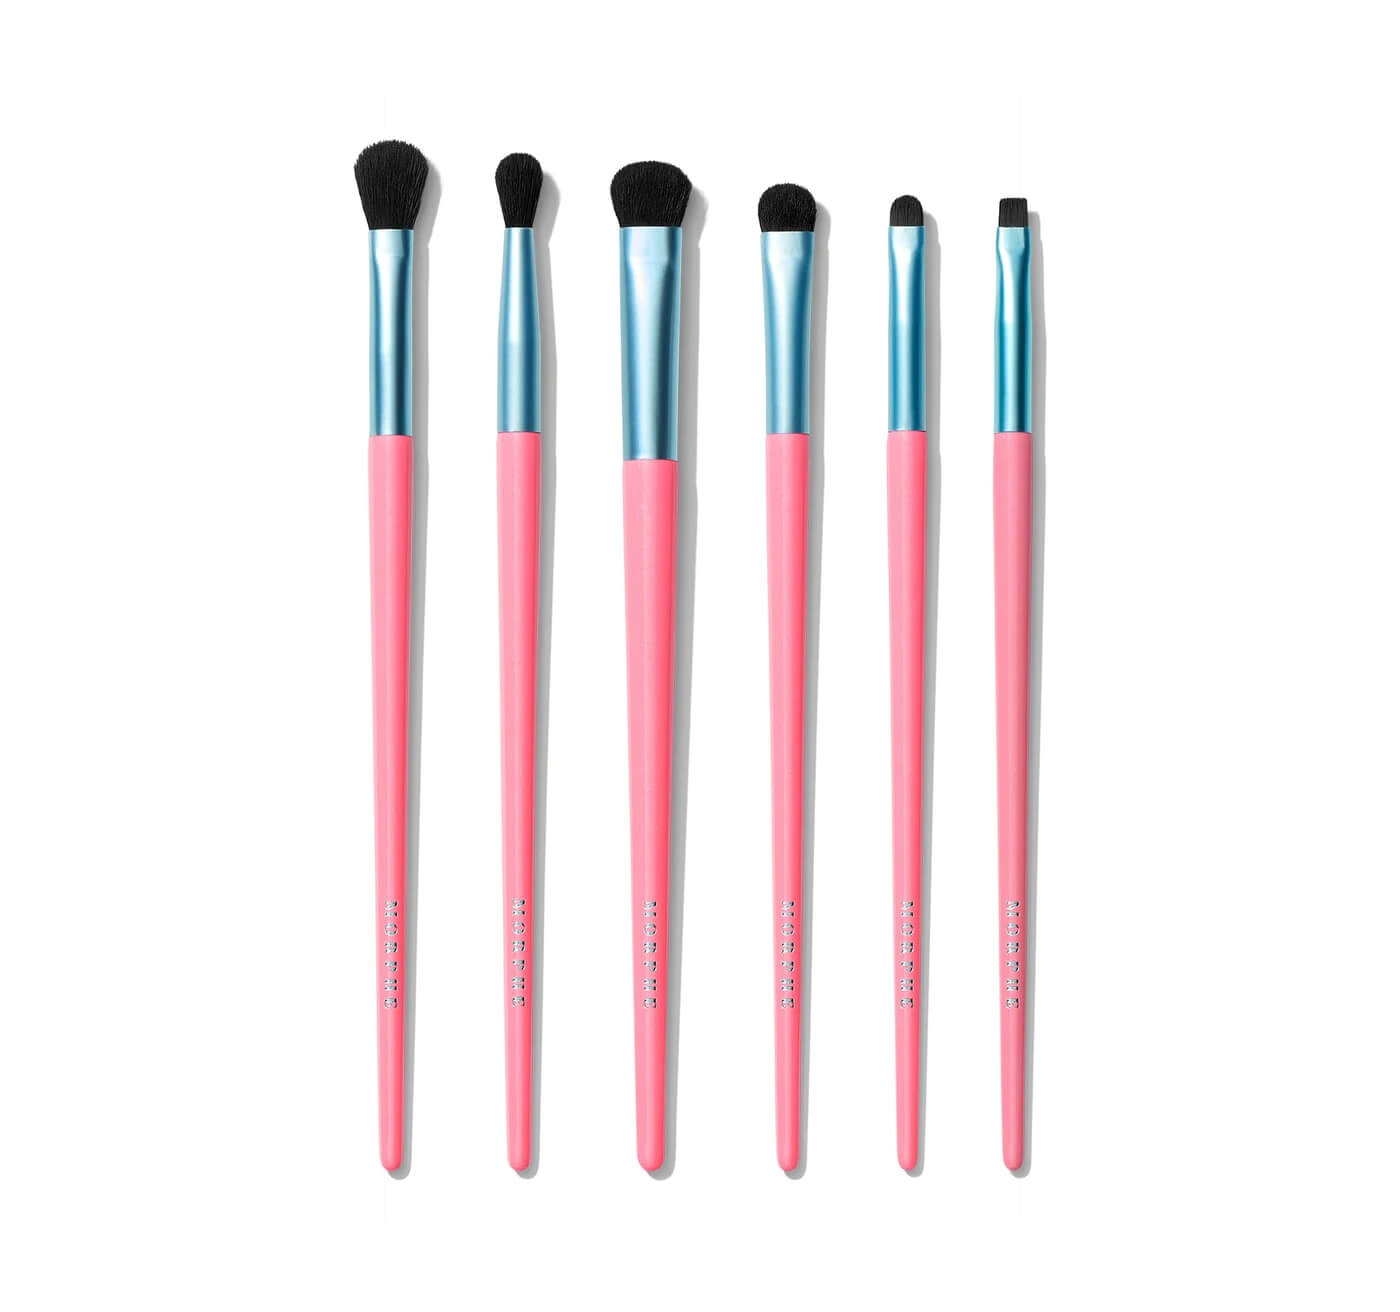 morphe sweet oasis makeup eye brush set available at heygirl.pk for delivery in Pakistan